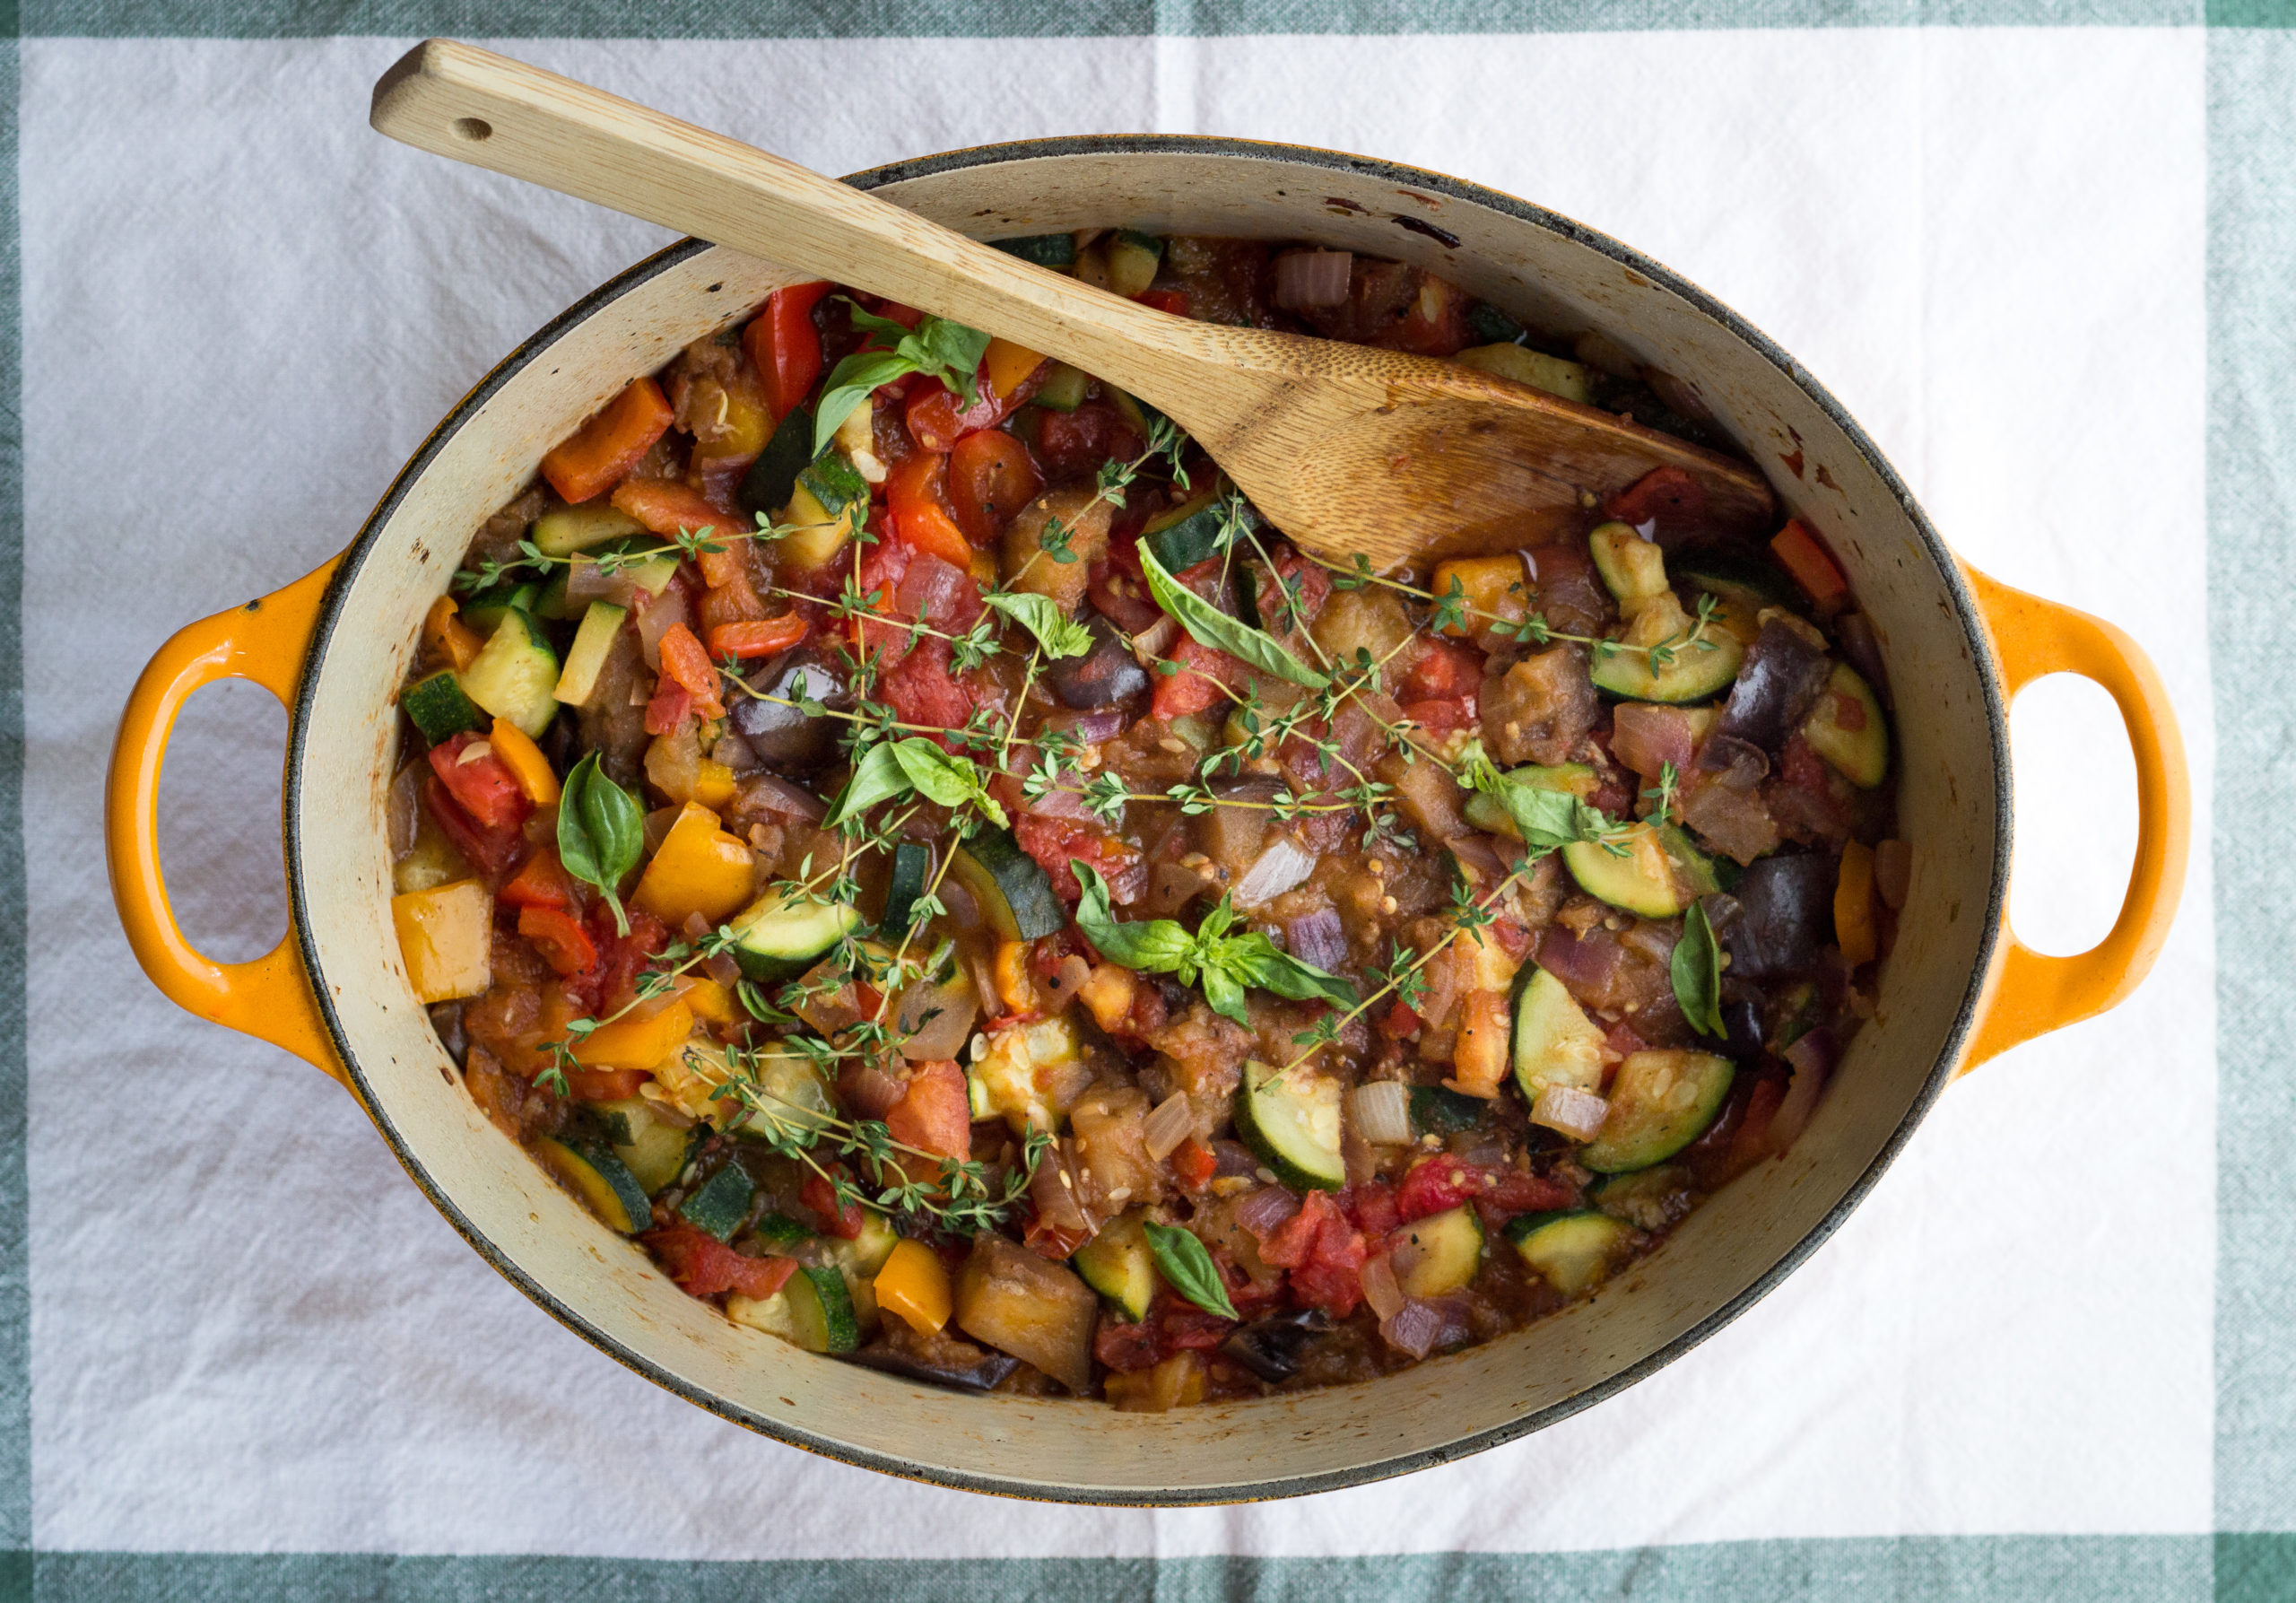 Overhead view of rustic stew in large dutch oven pan with a wooden spatula